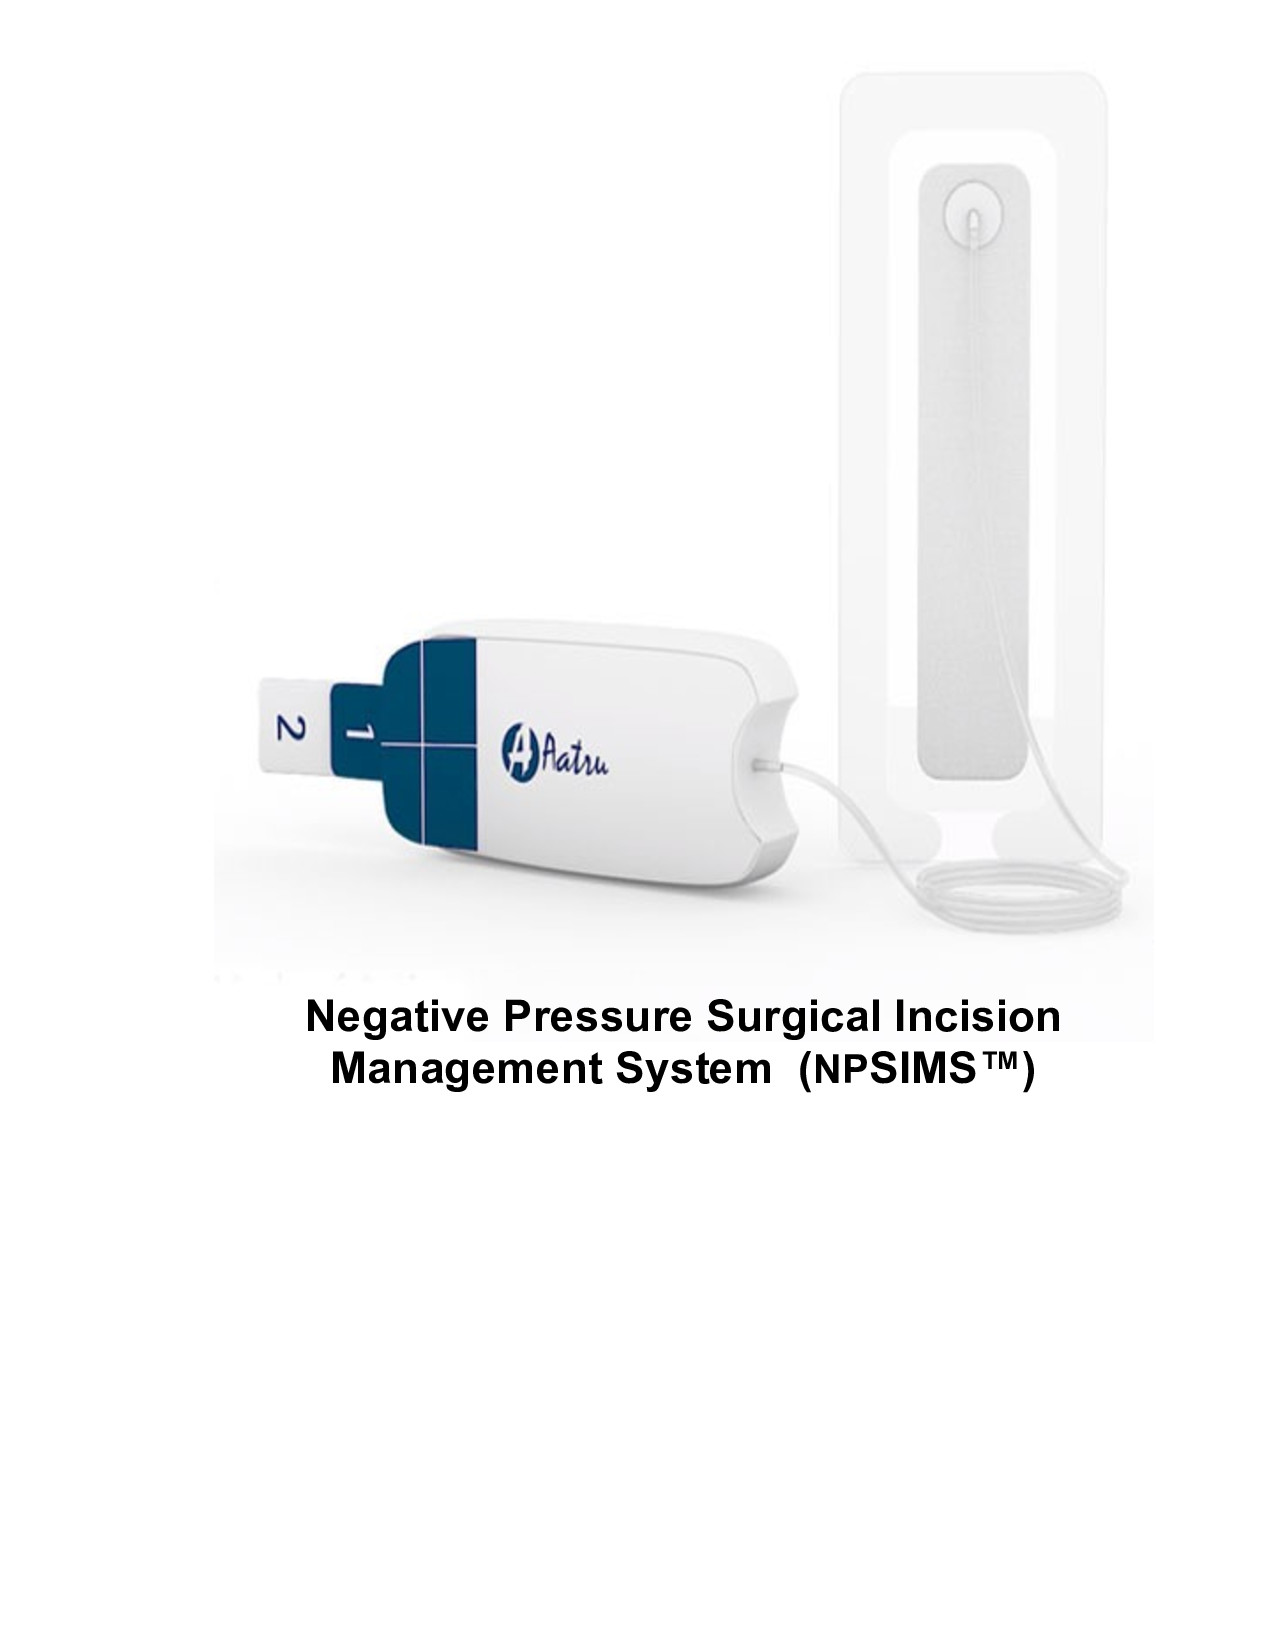 Aatru Medical Announces FDA Clearance and Commercial Launch of the NPSIMS™  -	Negative Pressure Surgical Incision Management System